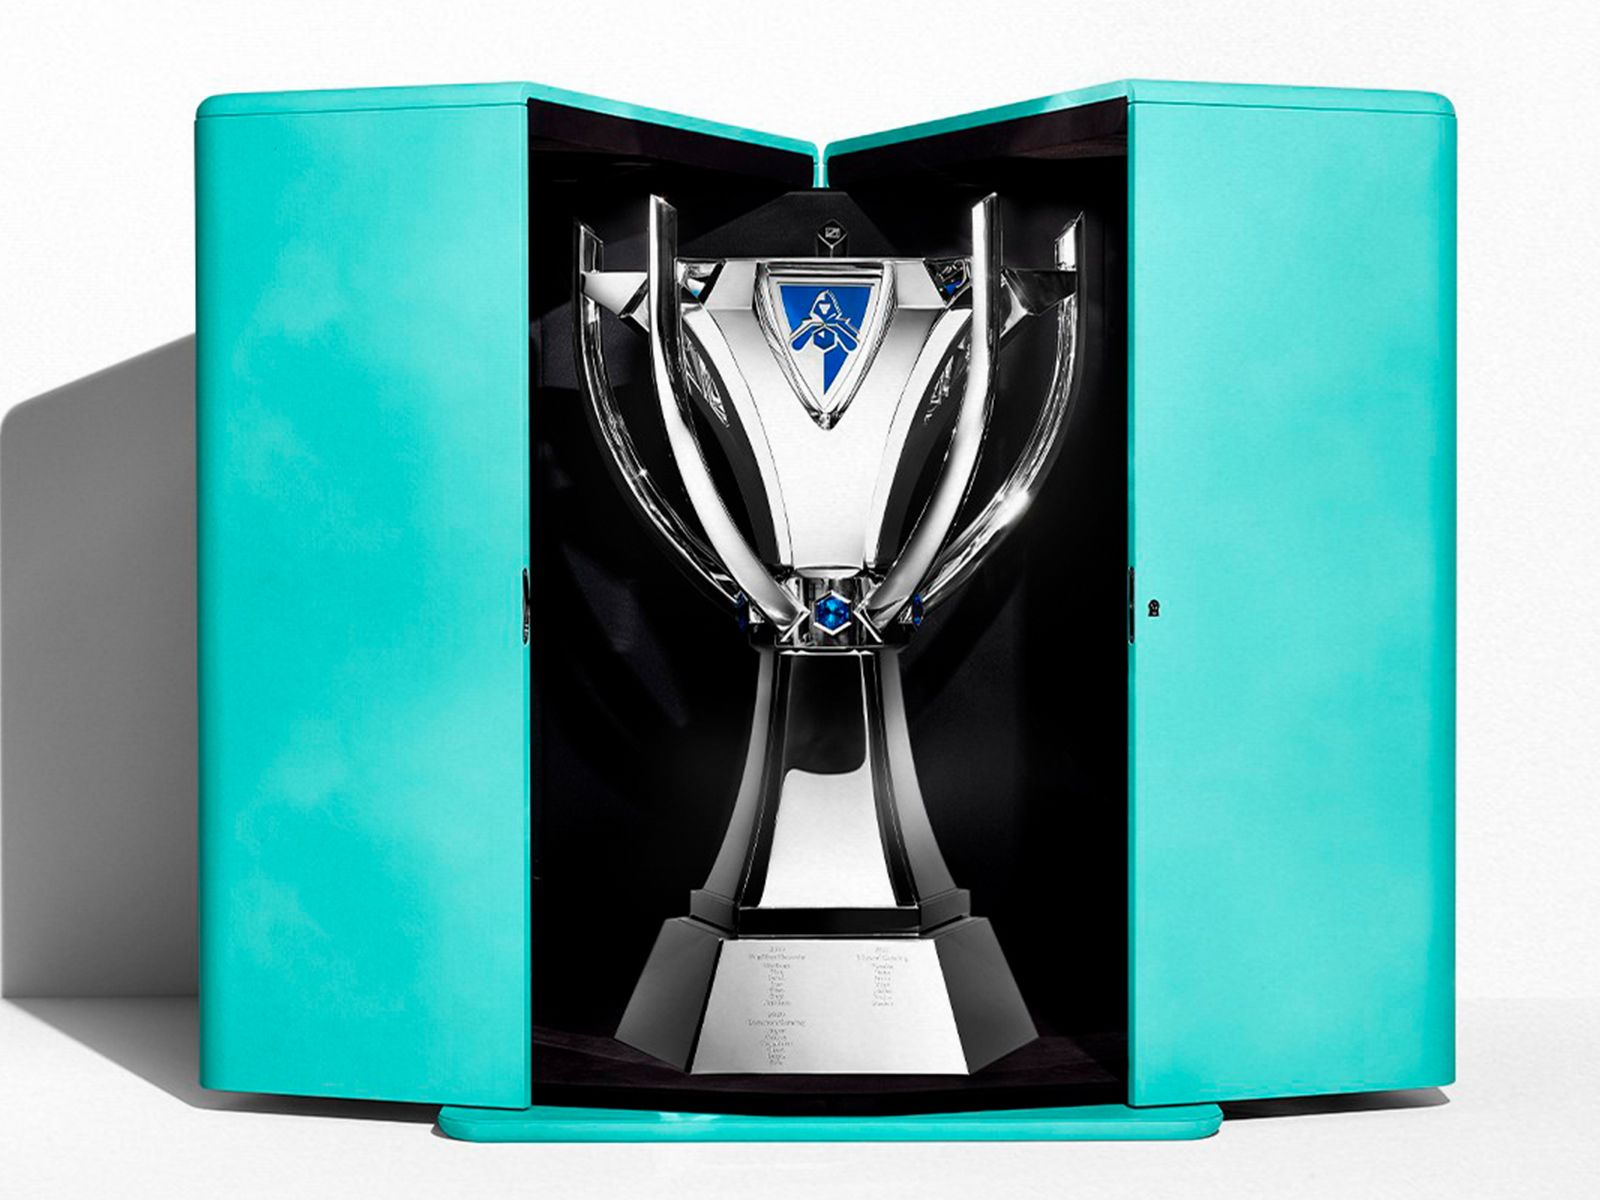 Tiffany & Co. designs official League of Legends world championship trophy